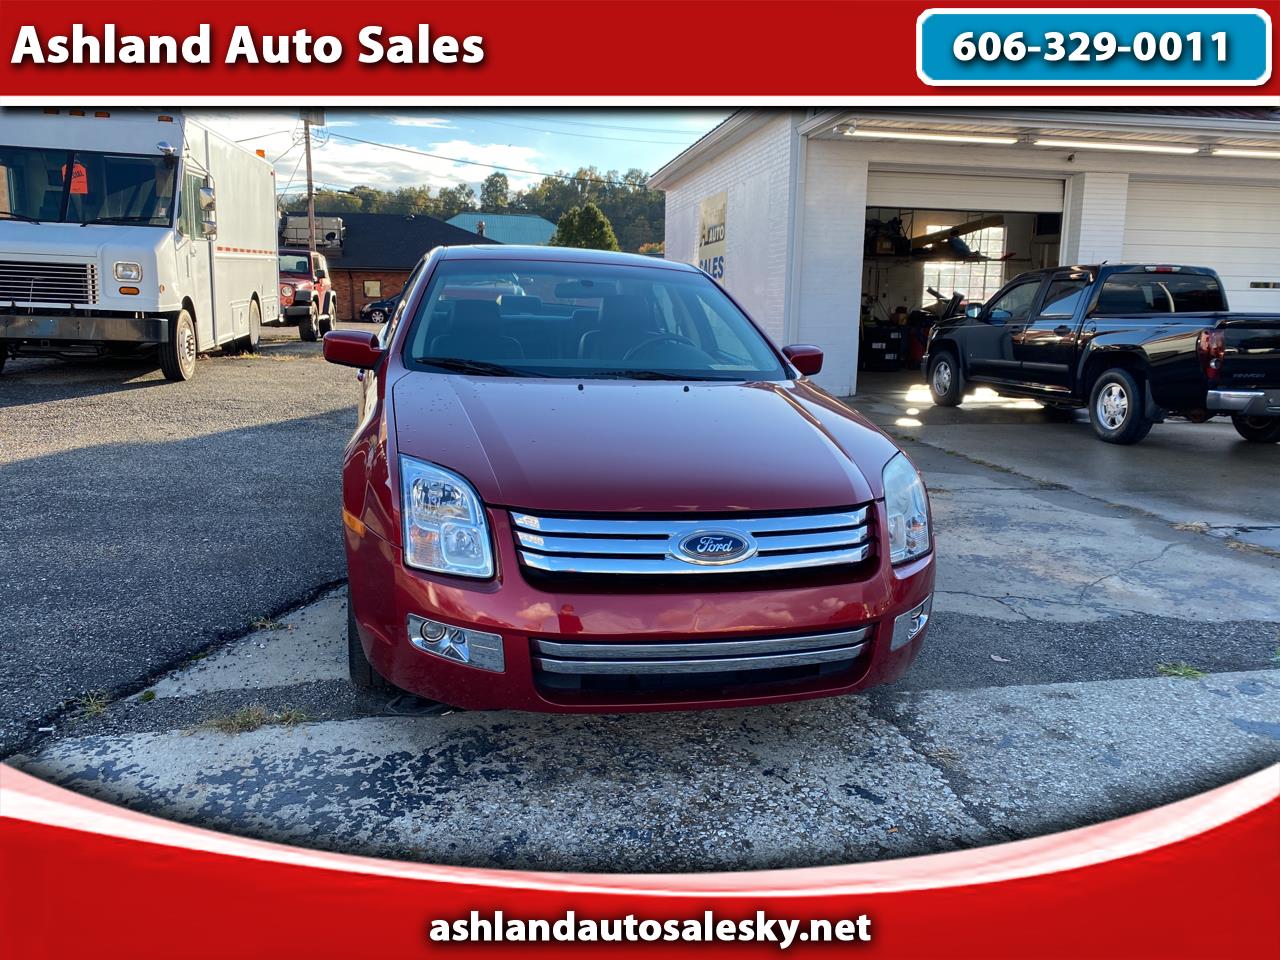 Ford Fusion 4dr Sdn I4 SEL 2006